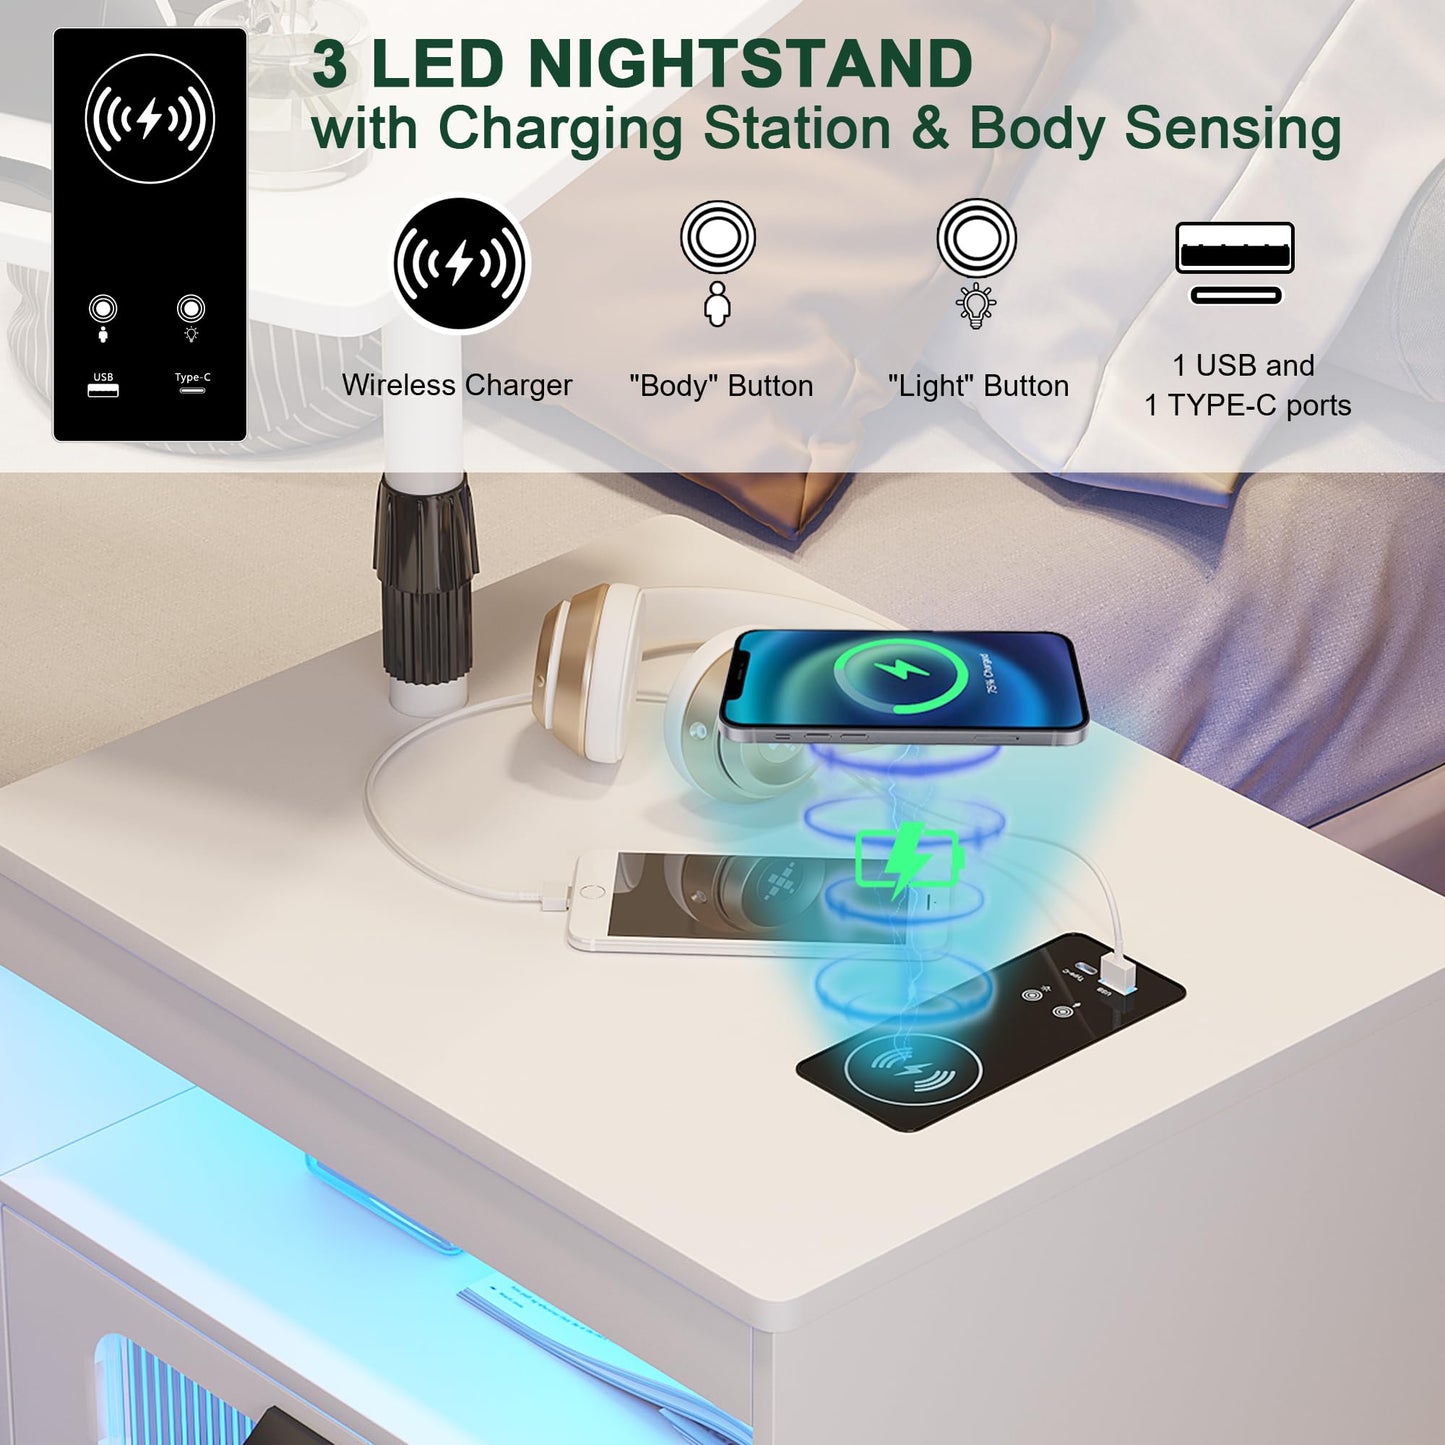 HNEBC Nightstand with Wireless Charging Station, LED Nightstand Has Adjustable Rotary Workstation,Smart Night Stand with 2 Drawers,Modern Bedside Table for Bedroom, Sensor Light/Wheel (White)